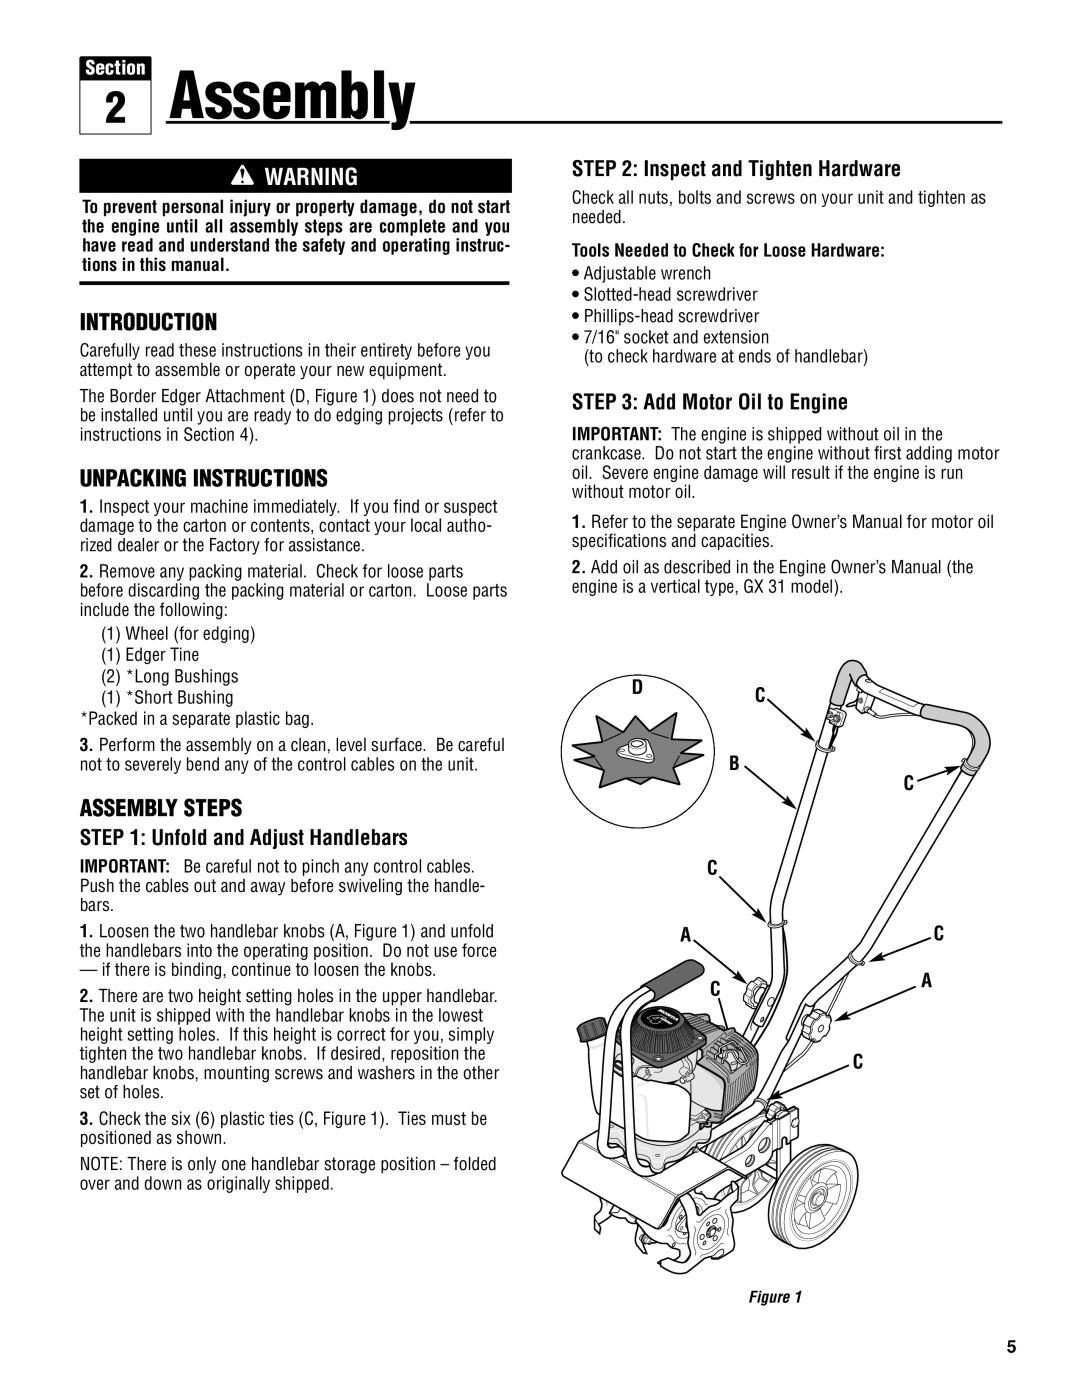 Troy-Bilt 148H Introduction, Unpacking Instructions, Assembly Steps, Inspect and Tighten Hardware, Ac C A C, Section 